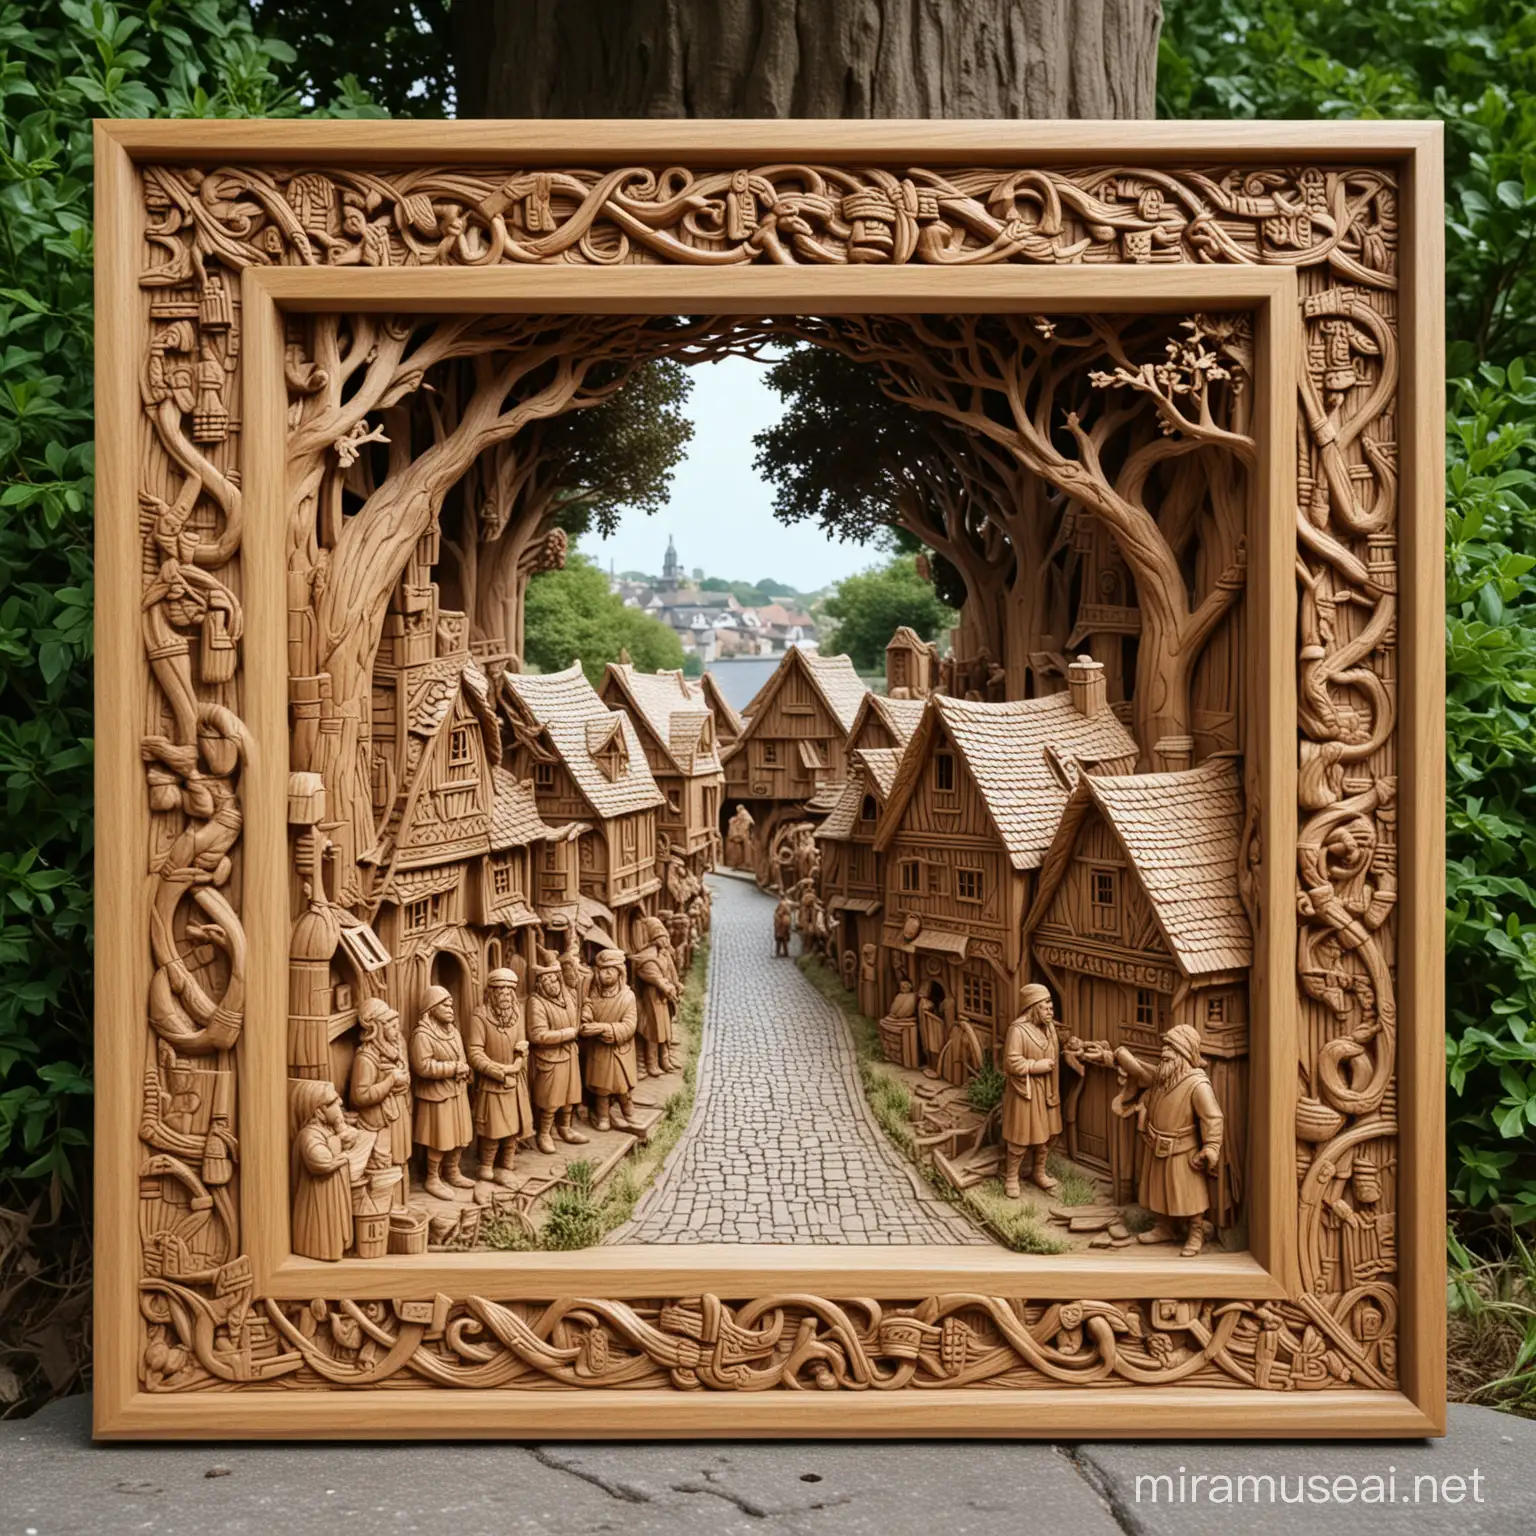 Viking Village 3D Carved in Oak with CelticInspired Locals Conversing